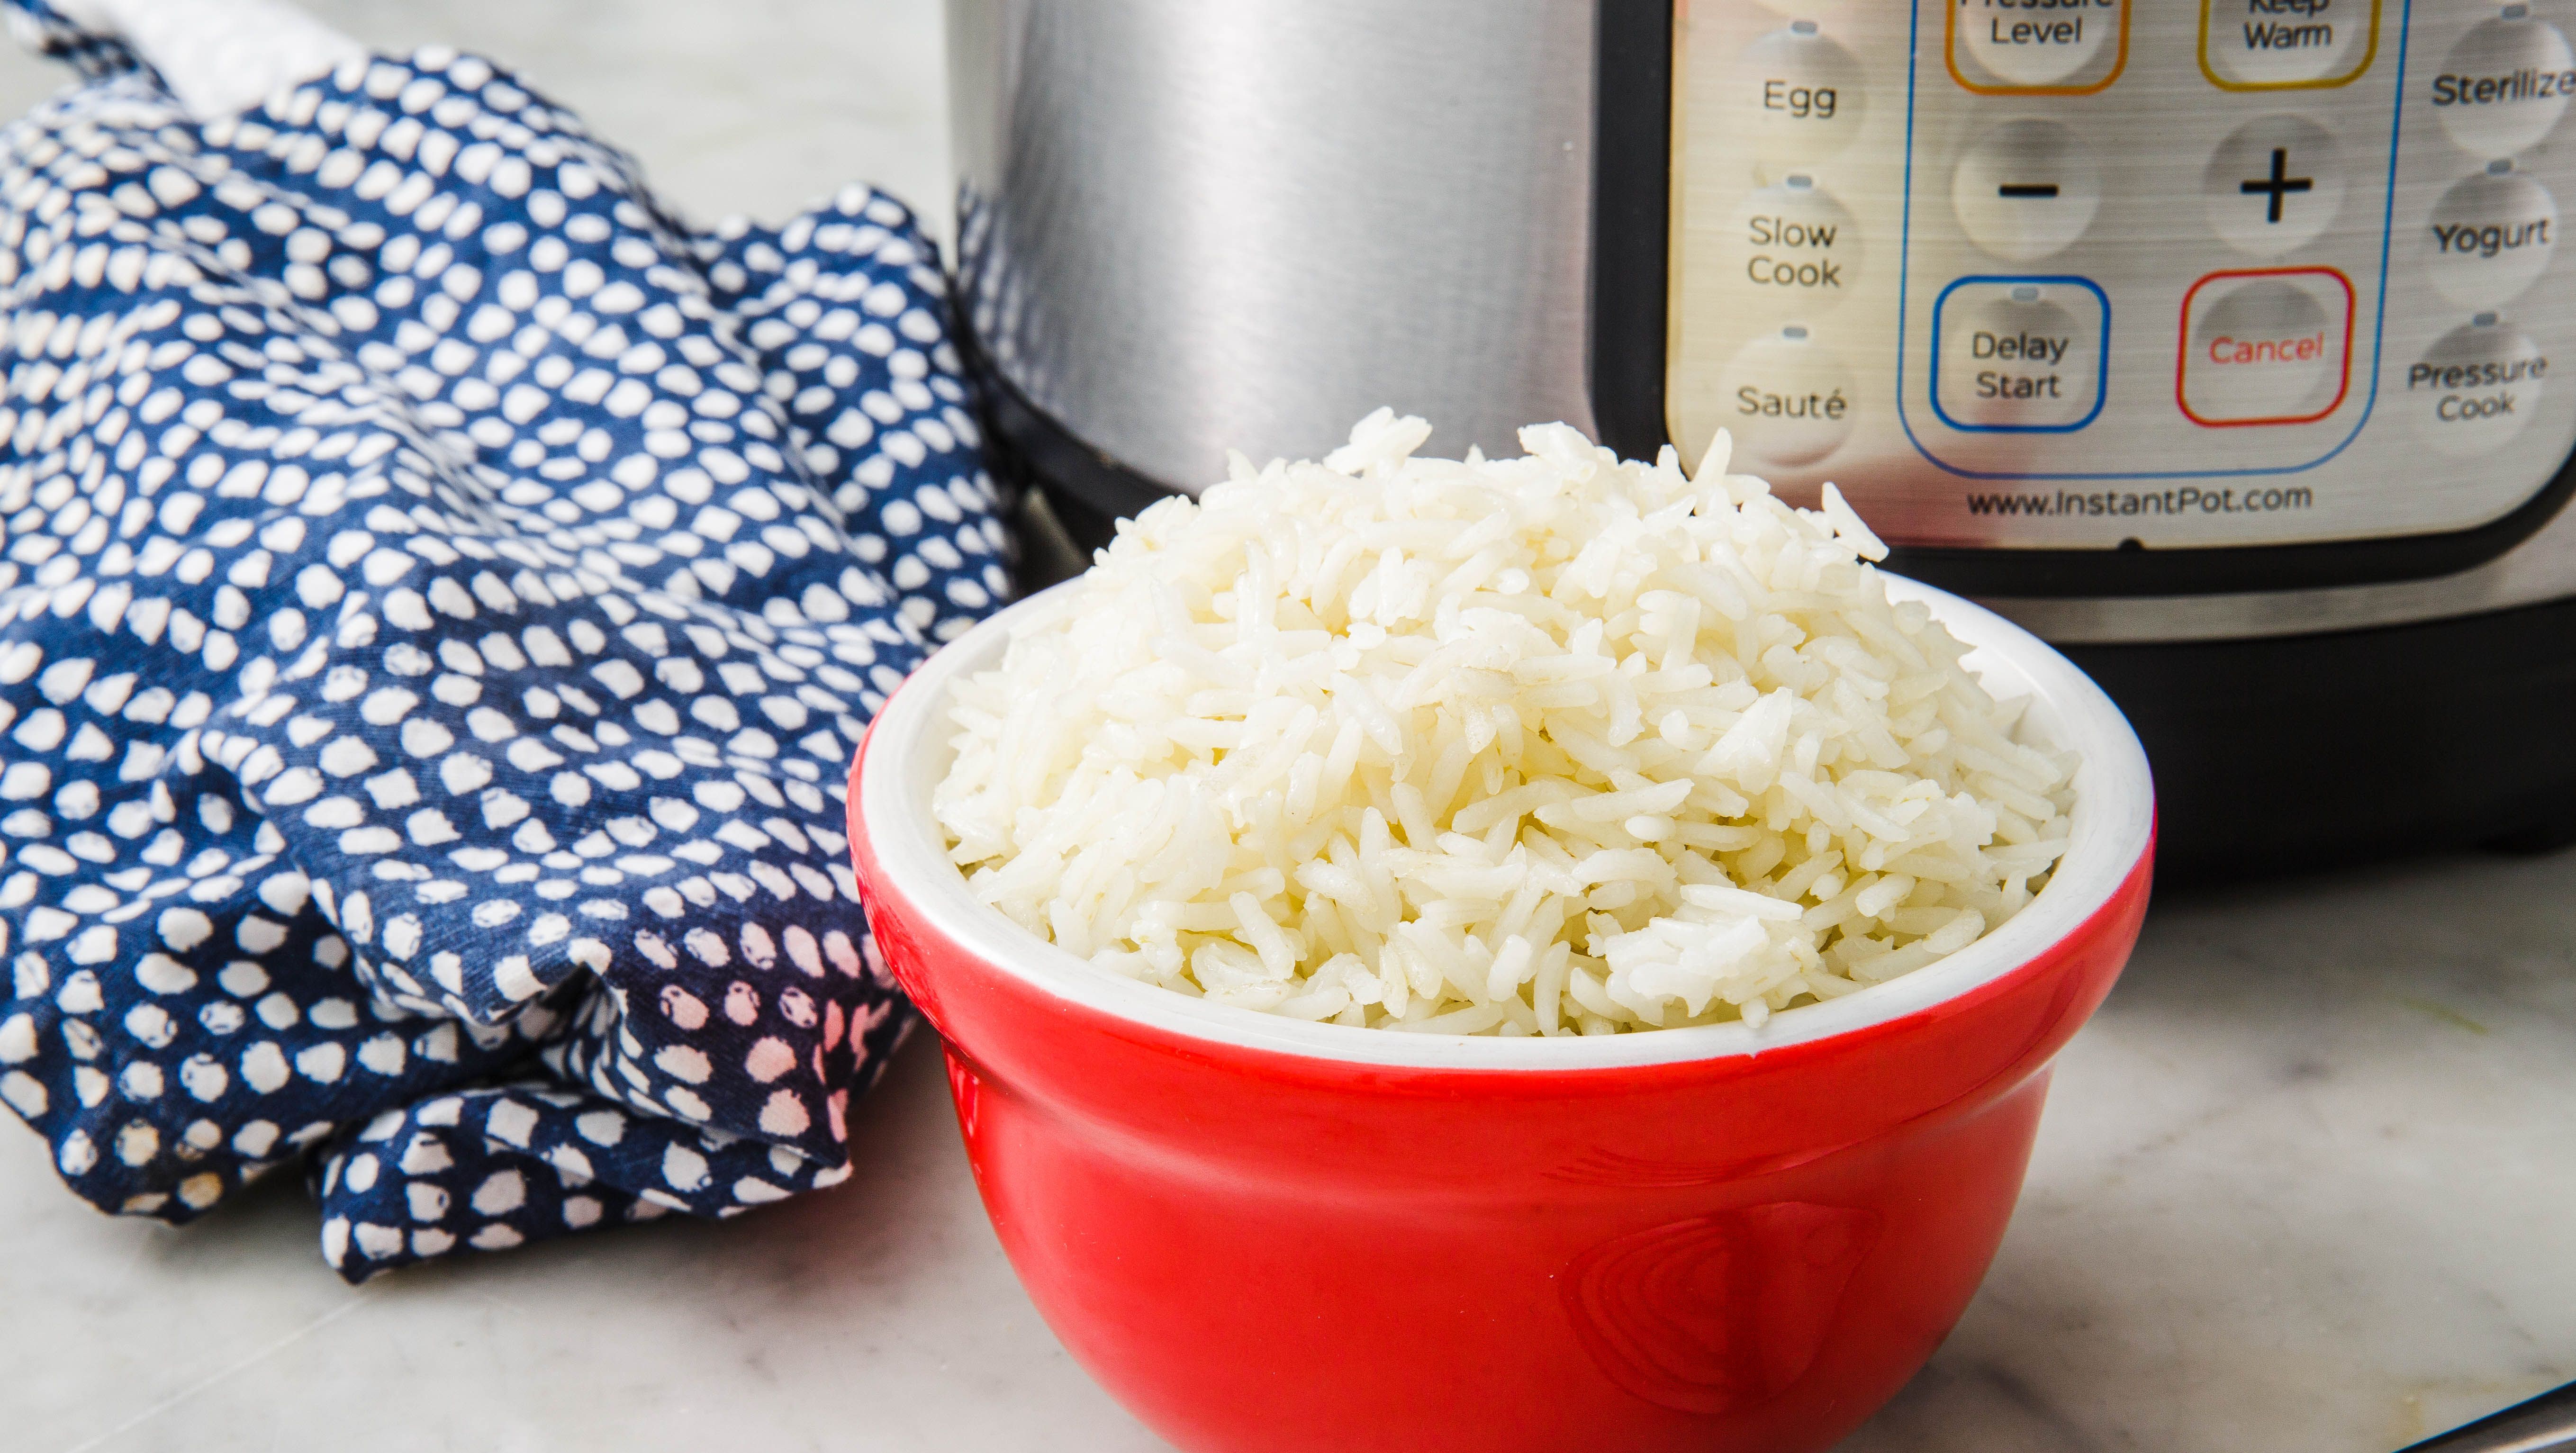 Instant Pot Rice (How to Use the Instant Pot Rice Setting)